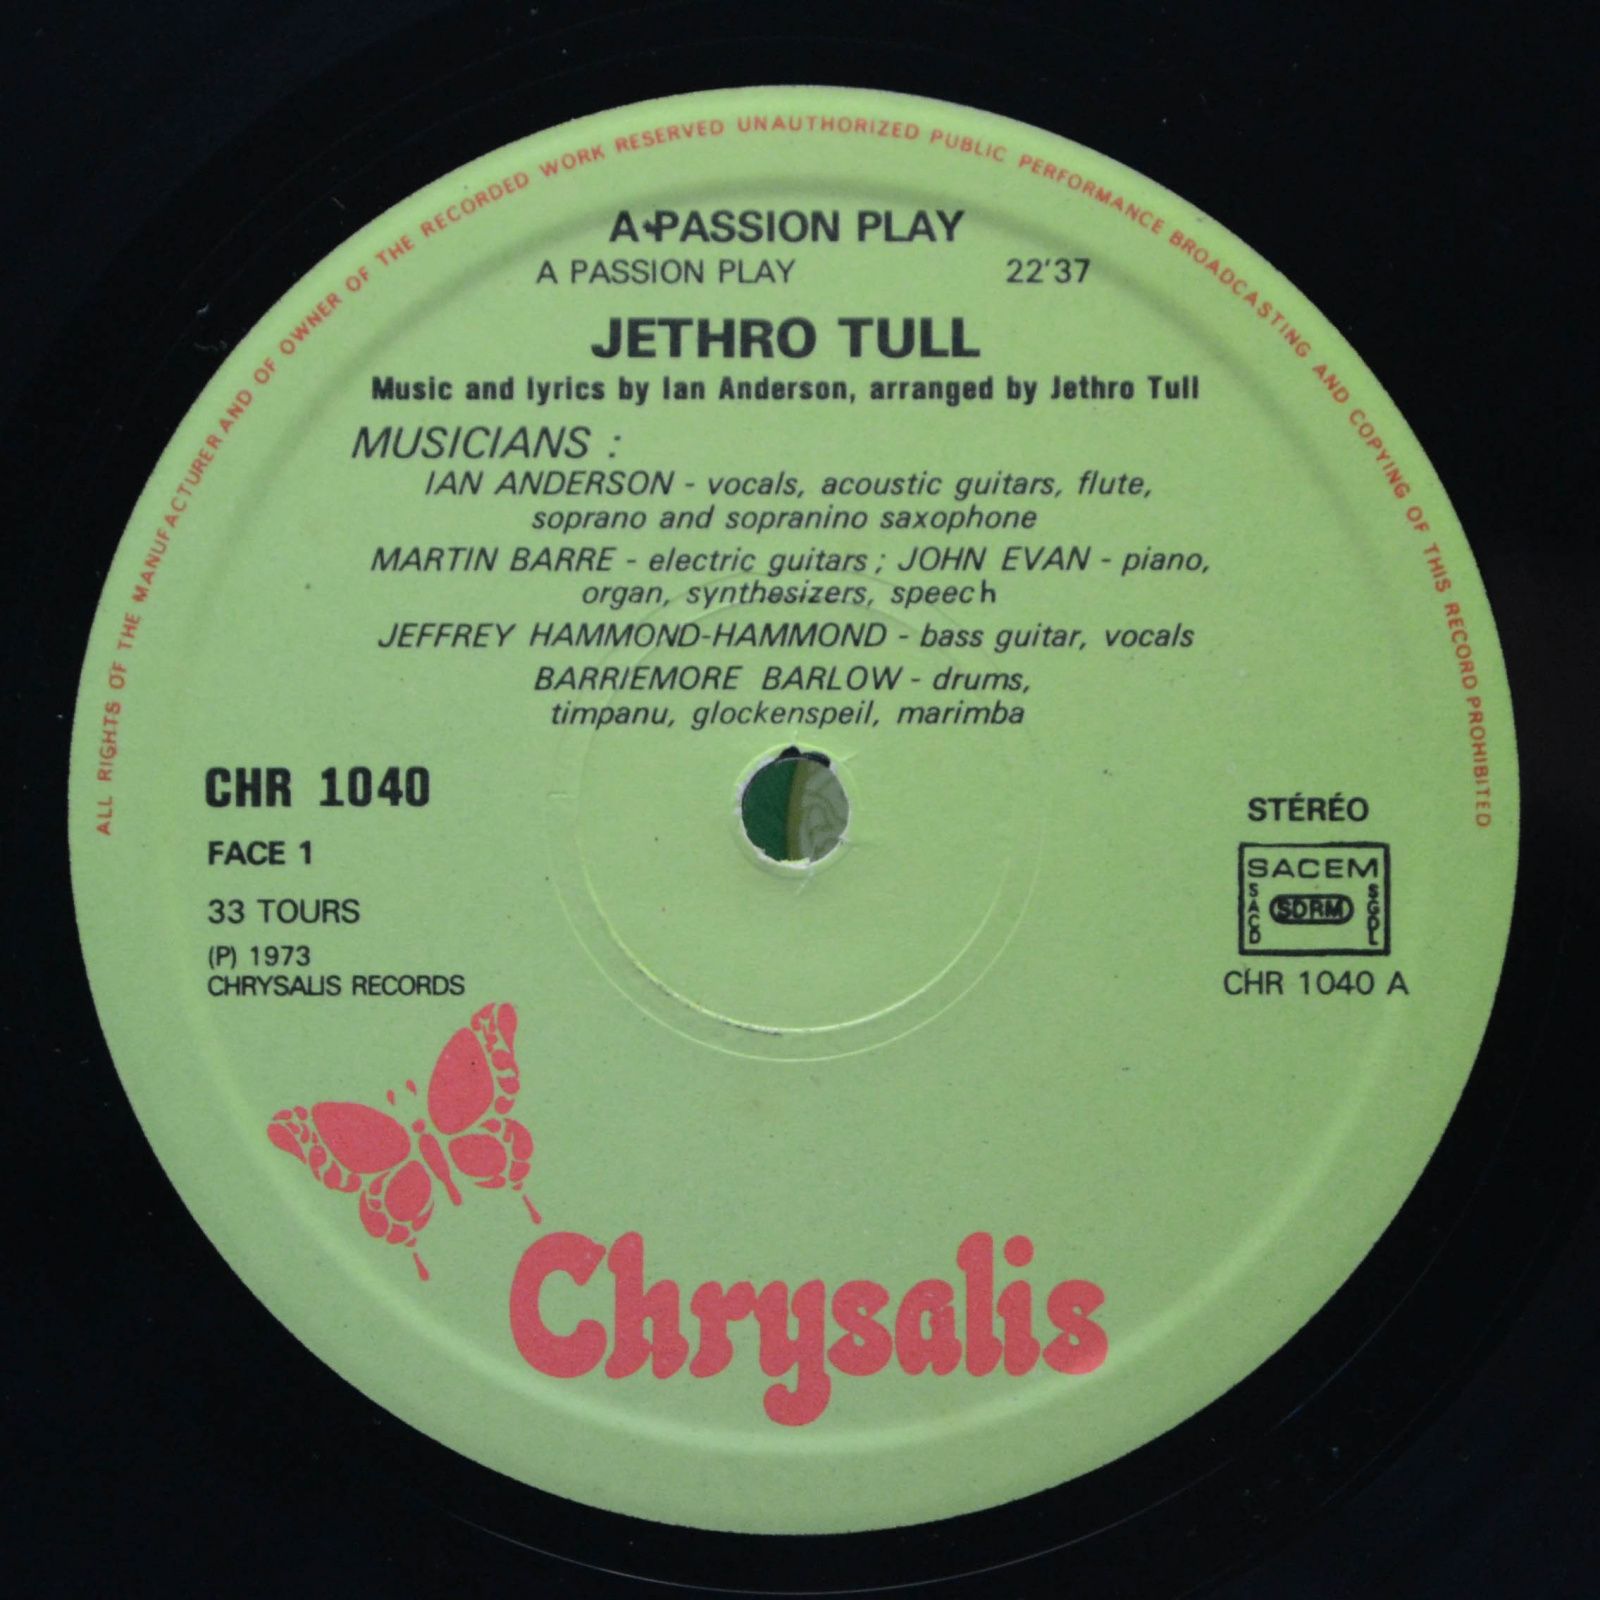 Jethro Tull — A Passion Play, 1973